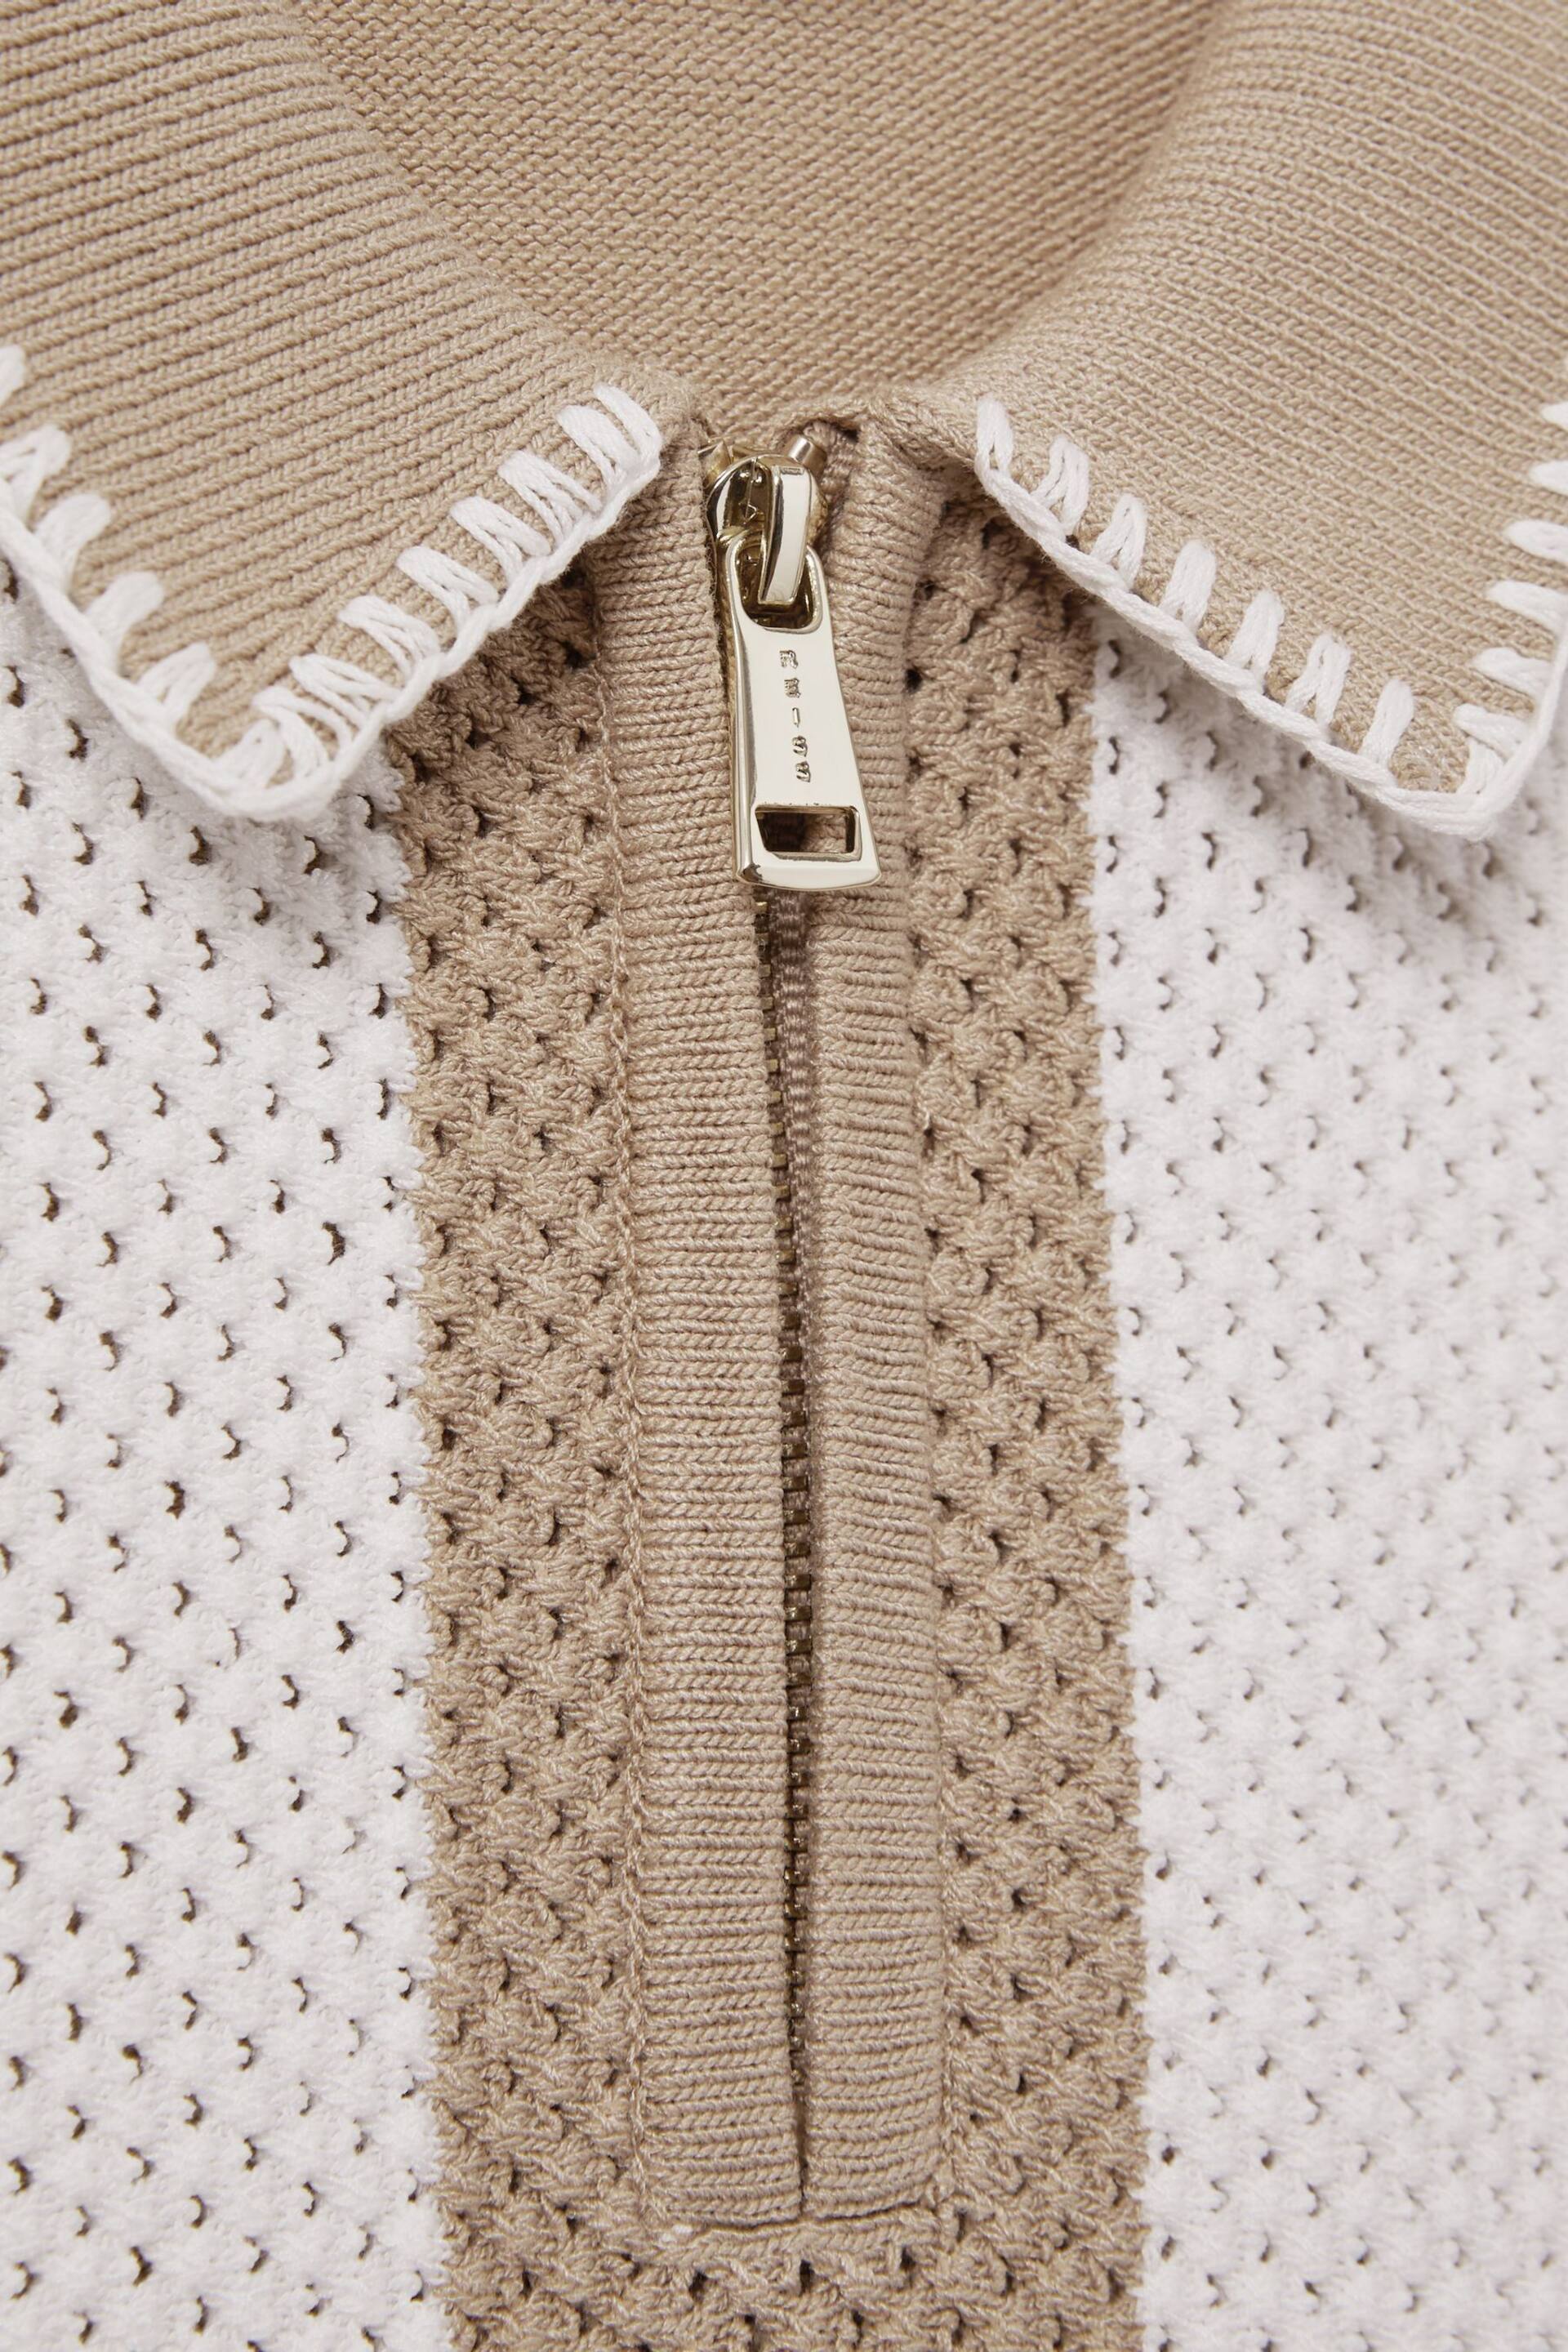 Reiss Brown Paros Knitted Striped Half Zip Polo Shirt - Image 4 of 4